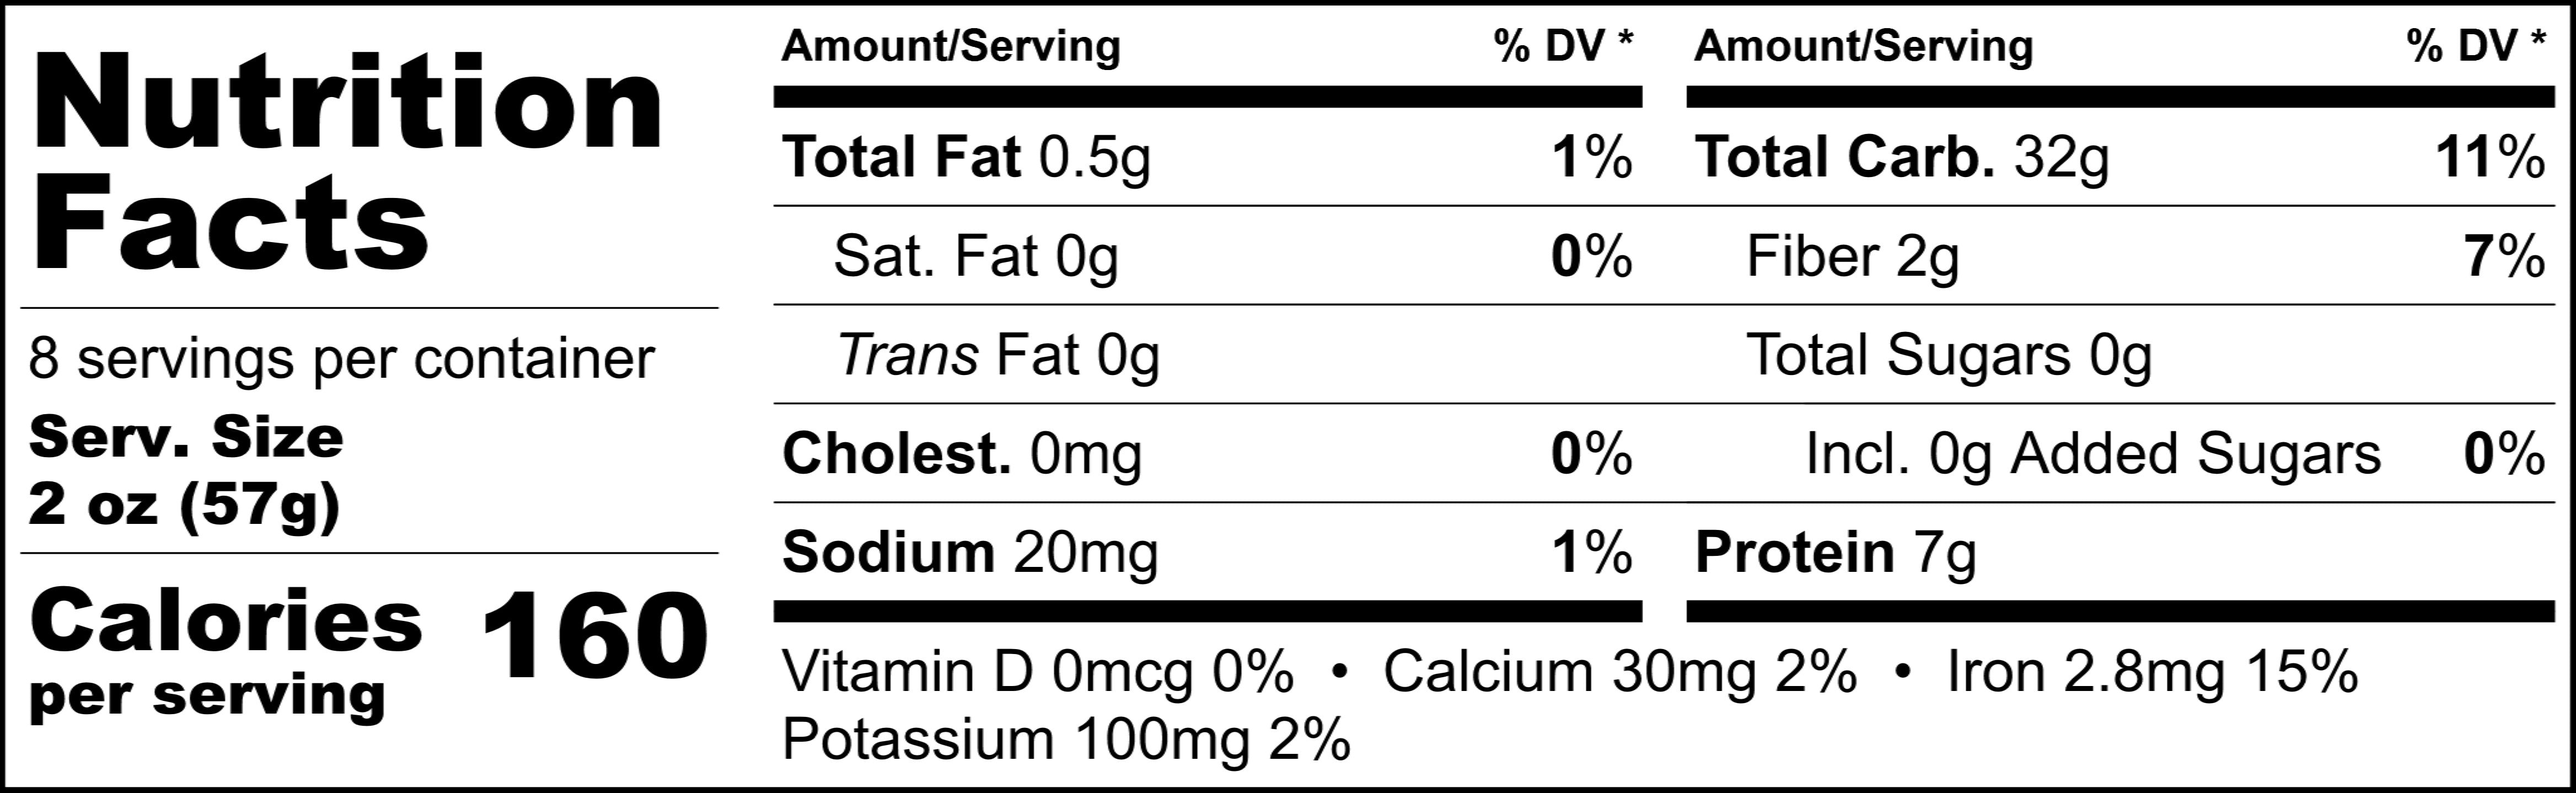 Pappardelle's Sweet Basil Trenette Nutritional Statement